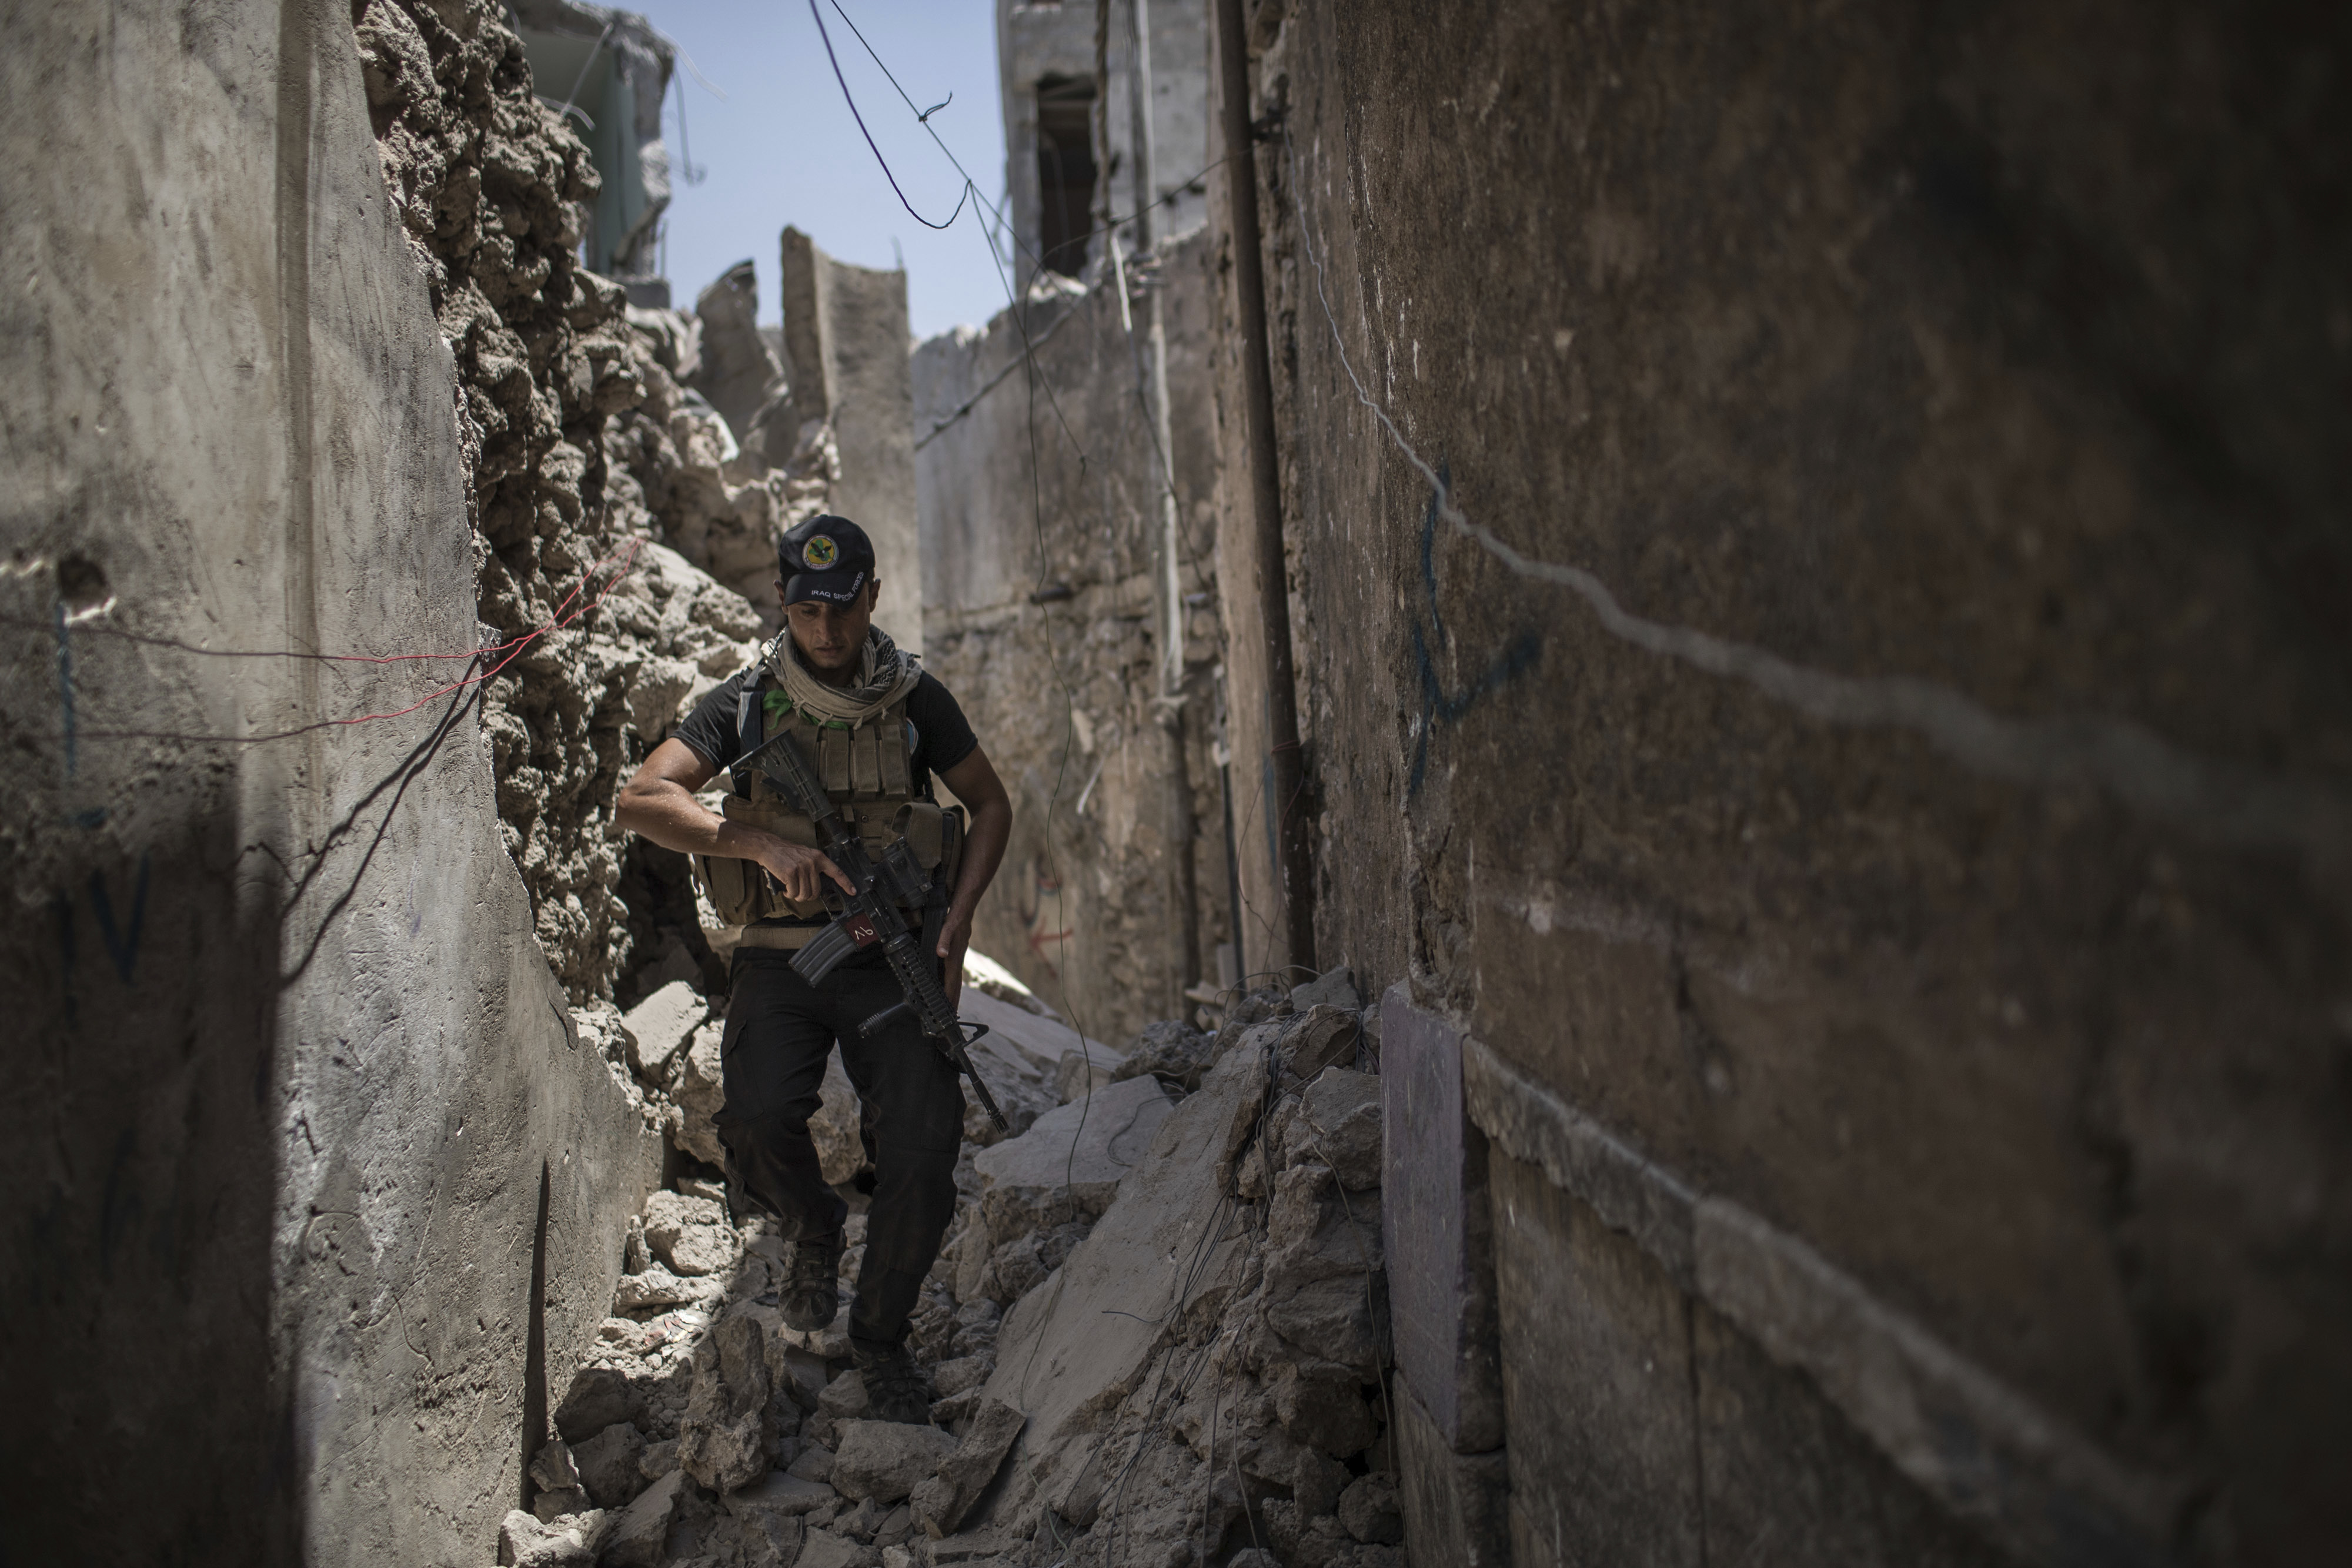 An Iraqi special forces soldier walks in an alley during fighting against Islamic State militants in the Old City of Mosul, Iraq, Tuesday, June 27, 2017. An Iraqi officer says counterattacks by Islamic State militants on the western edge of Mosul have stalled Iraqi forces' push in the Old City _ the last IS stronghold in the city. (AP Photo/Felipe Dana)